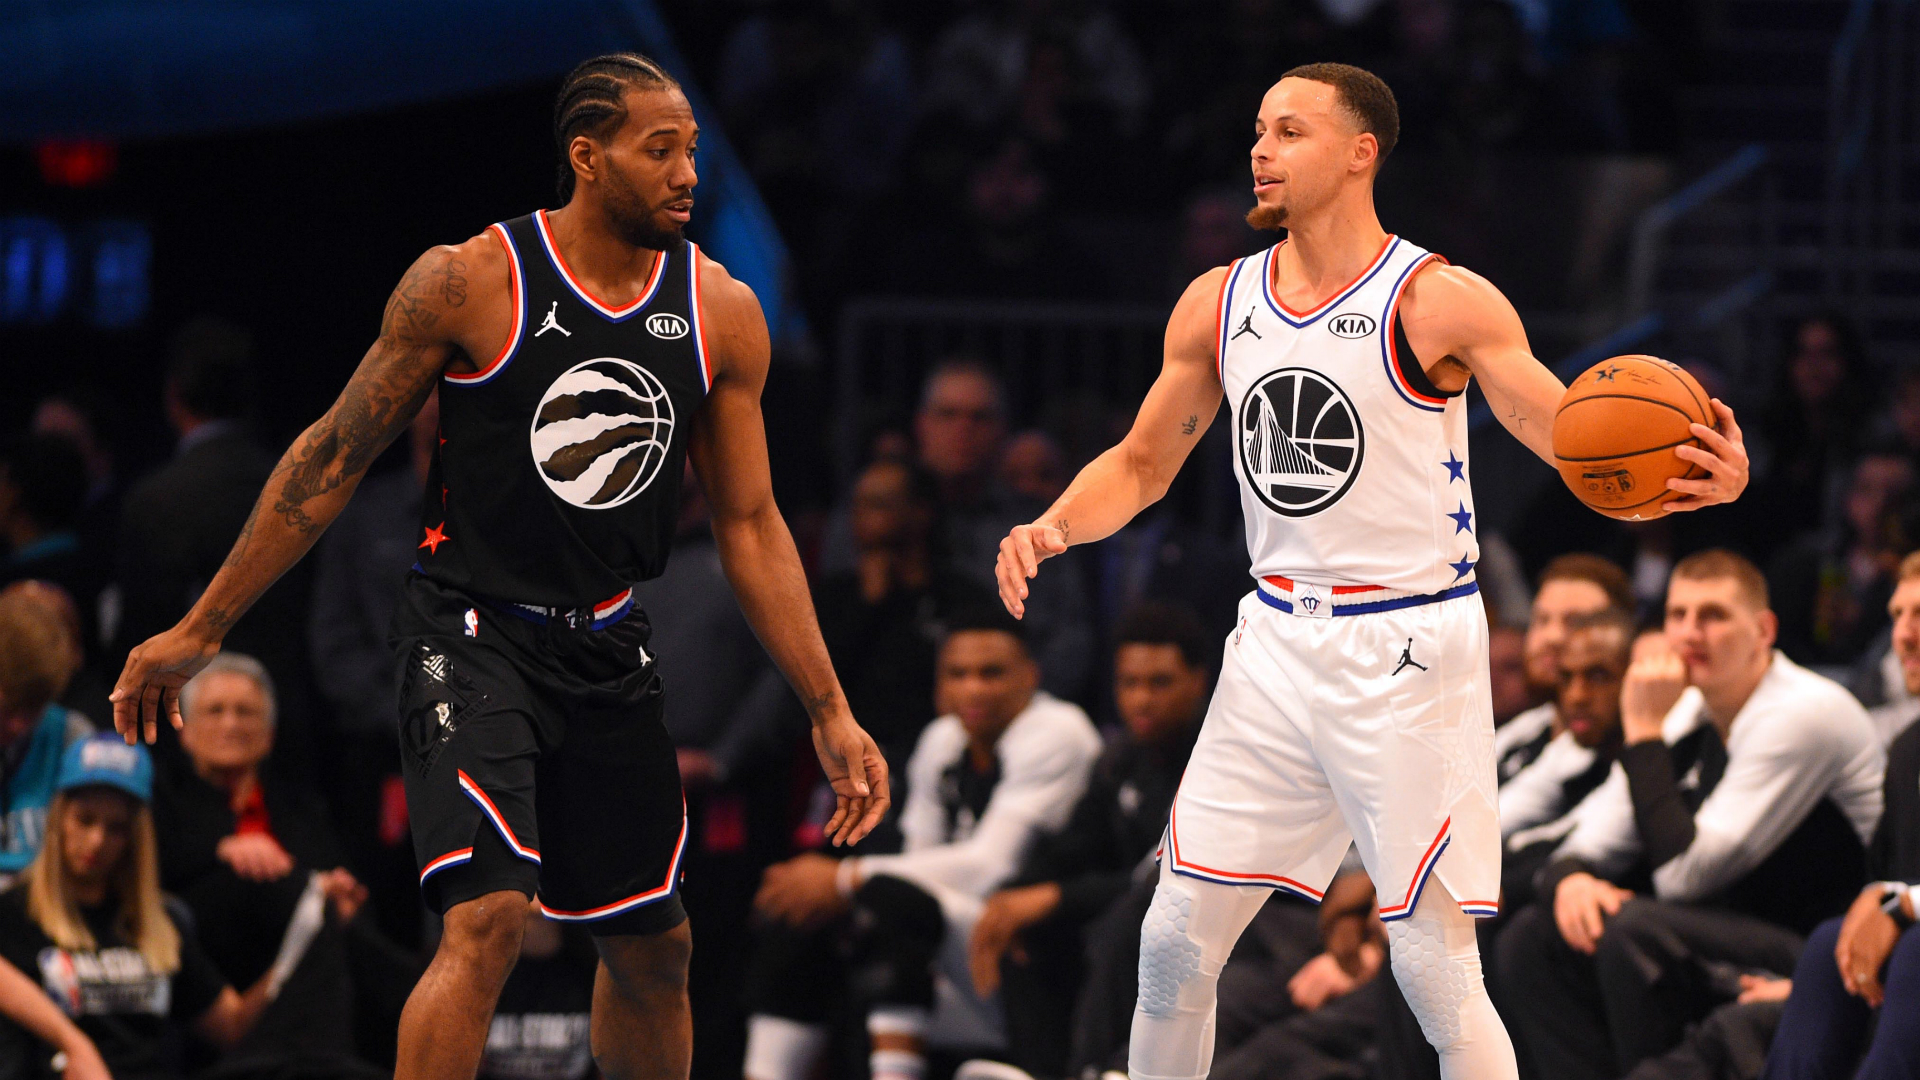 How to watch the 2019 NBA Finals Golden State Warriors at Toronto